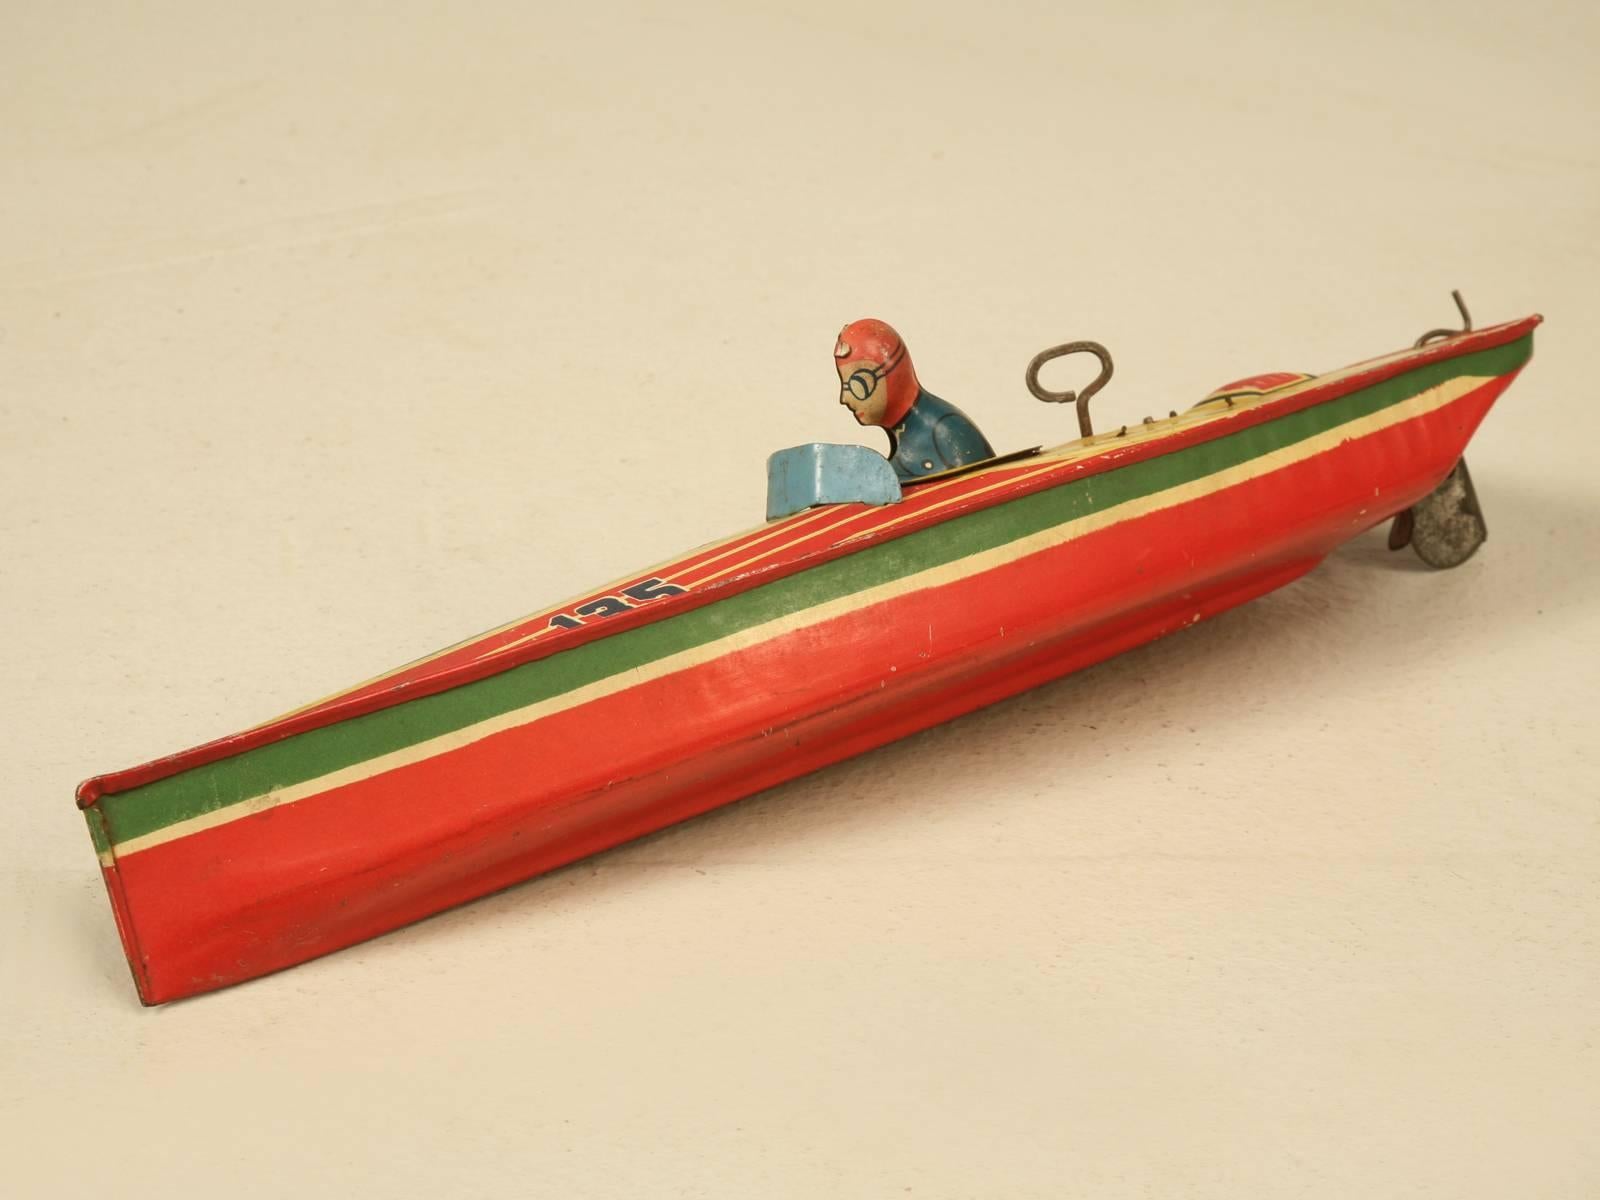 American Lindstrom tin windup boat made in the 1930s and in remarkable all original condition. The Lindstrom Tool & Toy Company from Bridgeport, Connecticut was founded in 1913 founded and they produced mechanical toys and games from pressed steel